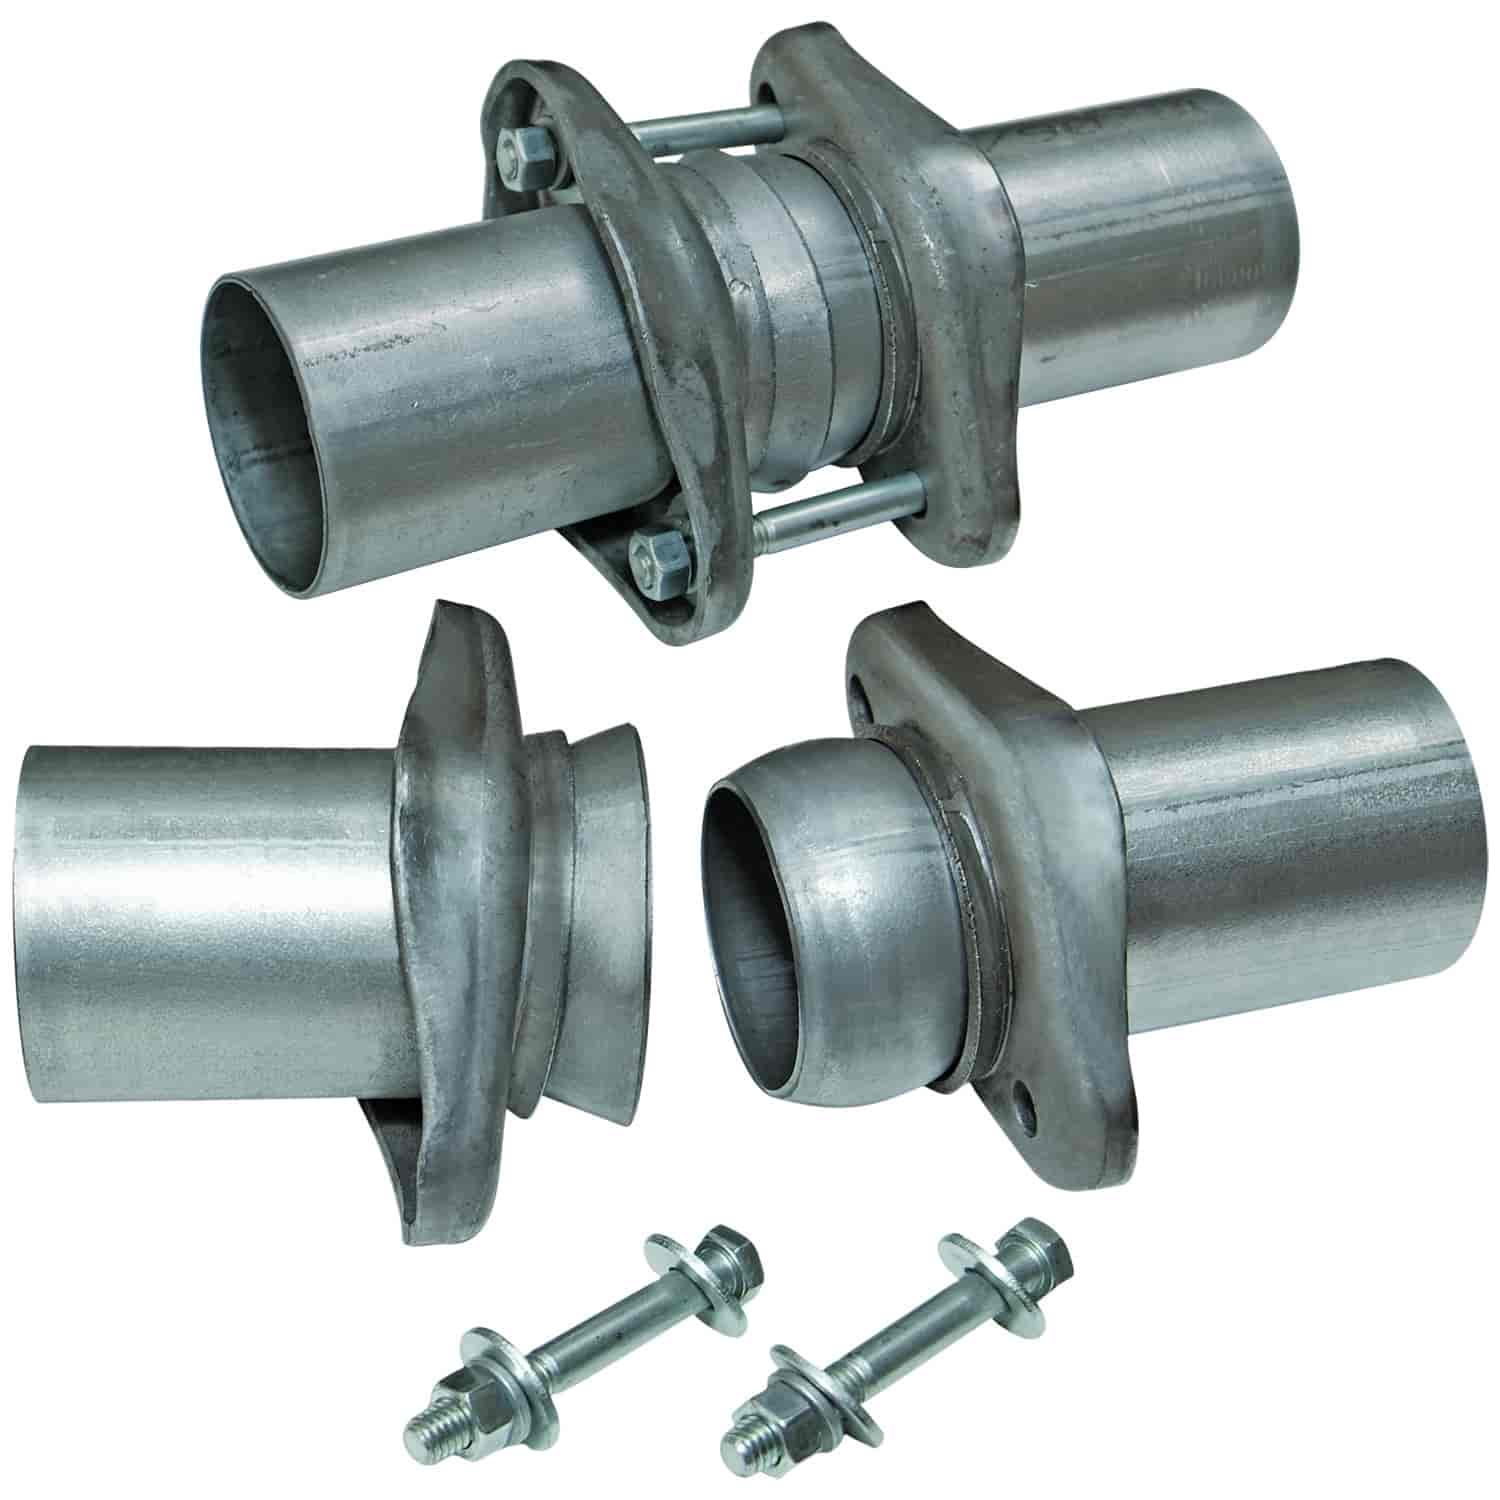 Header Collector Ball Flange Kit 2.5" Collector to 2.5" Tubing